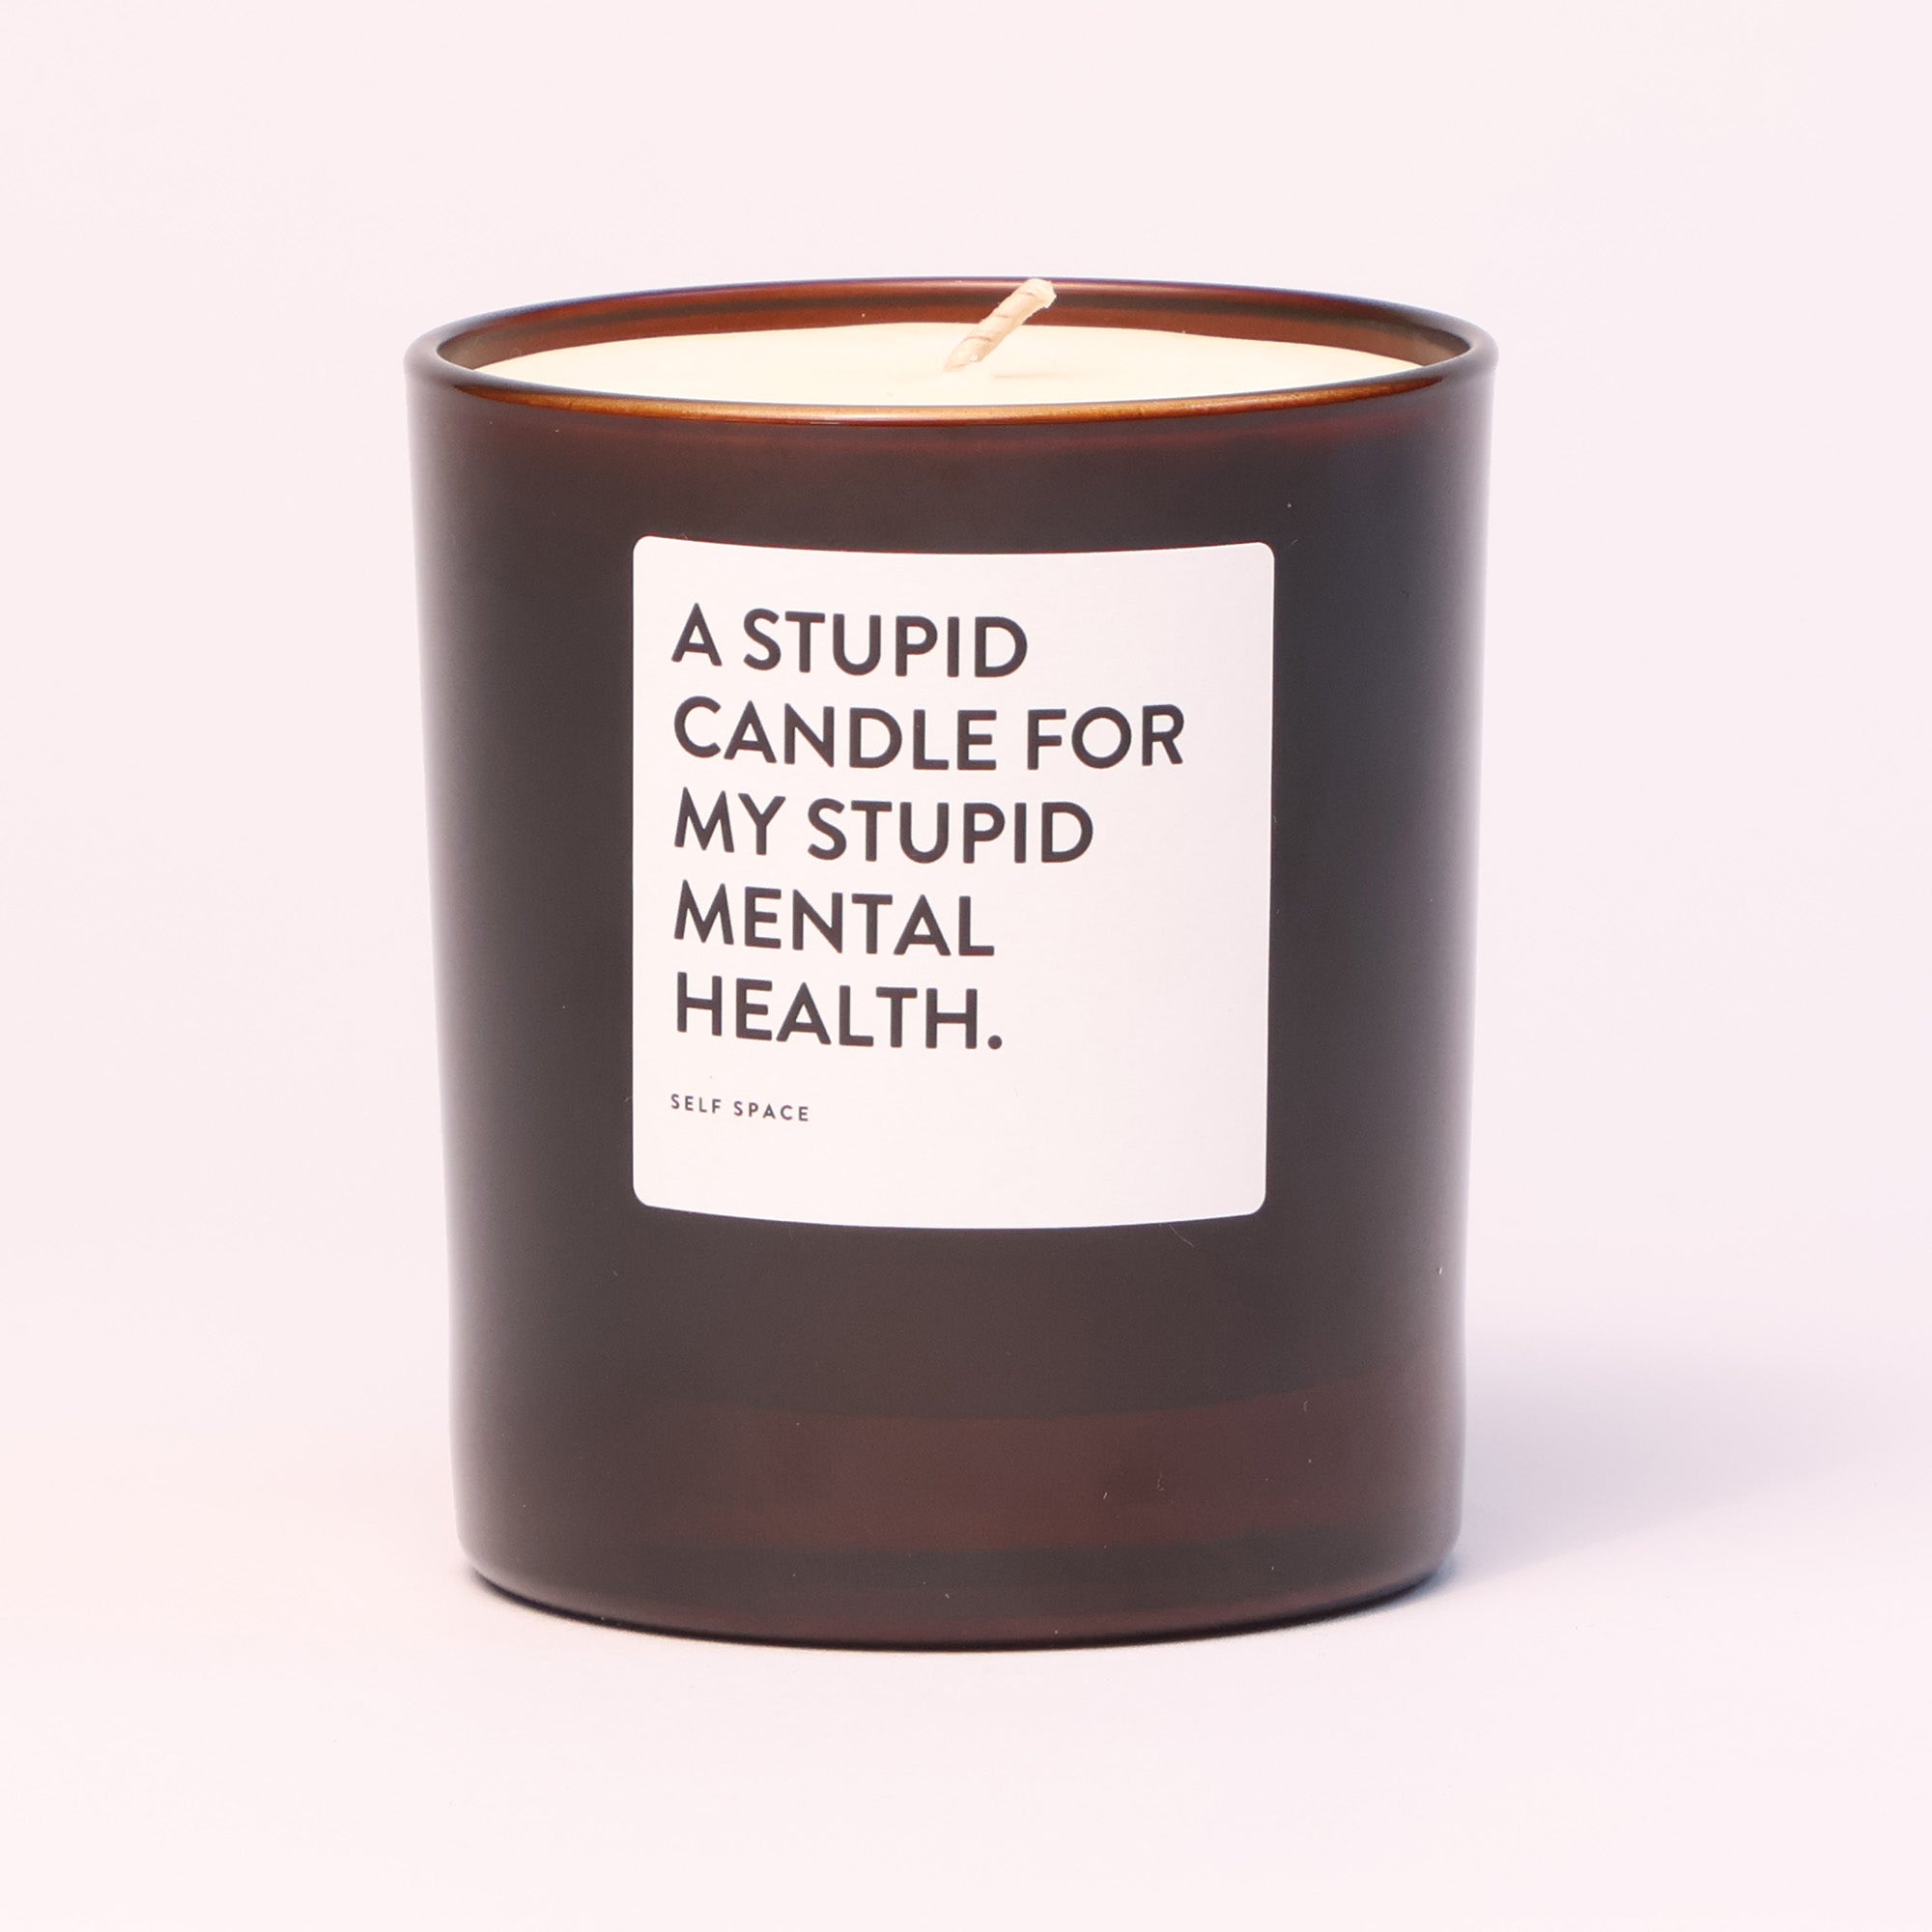 A Stupid Candle For My Stupid Mental Health